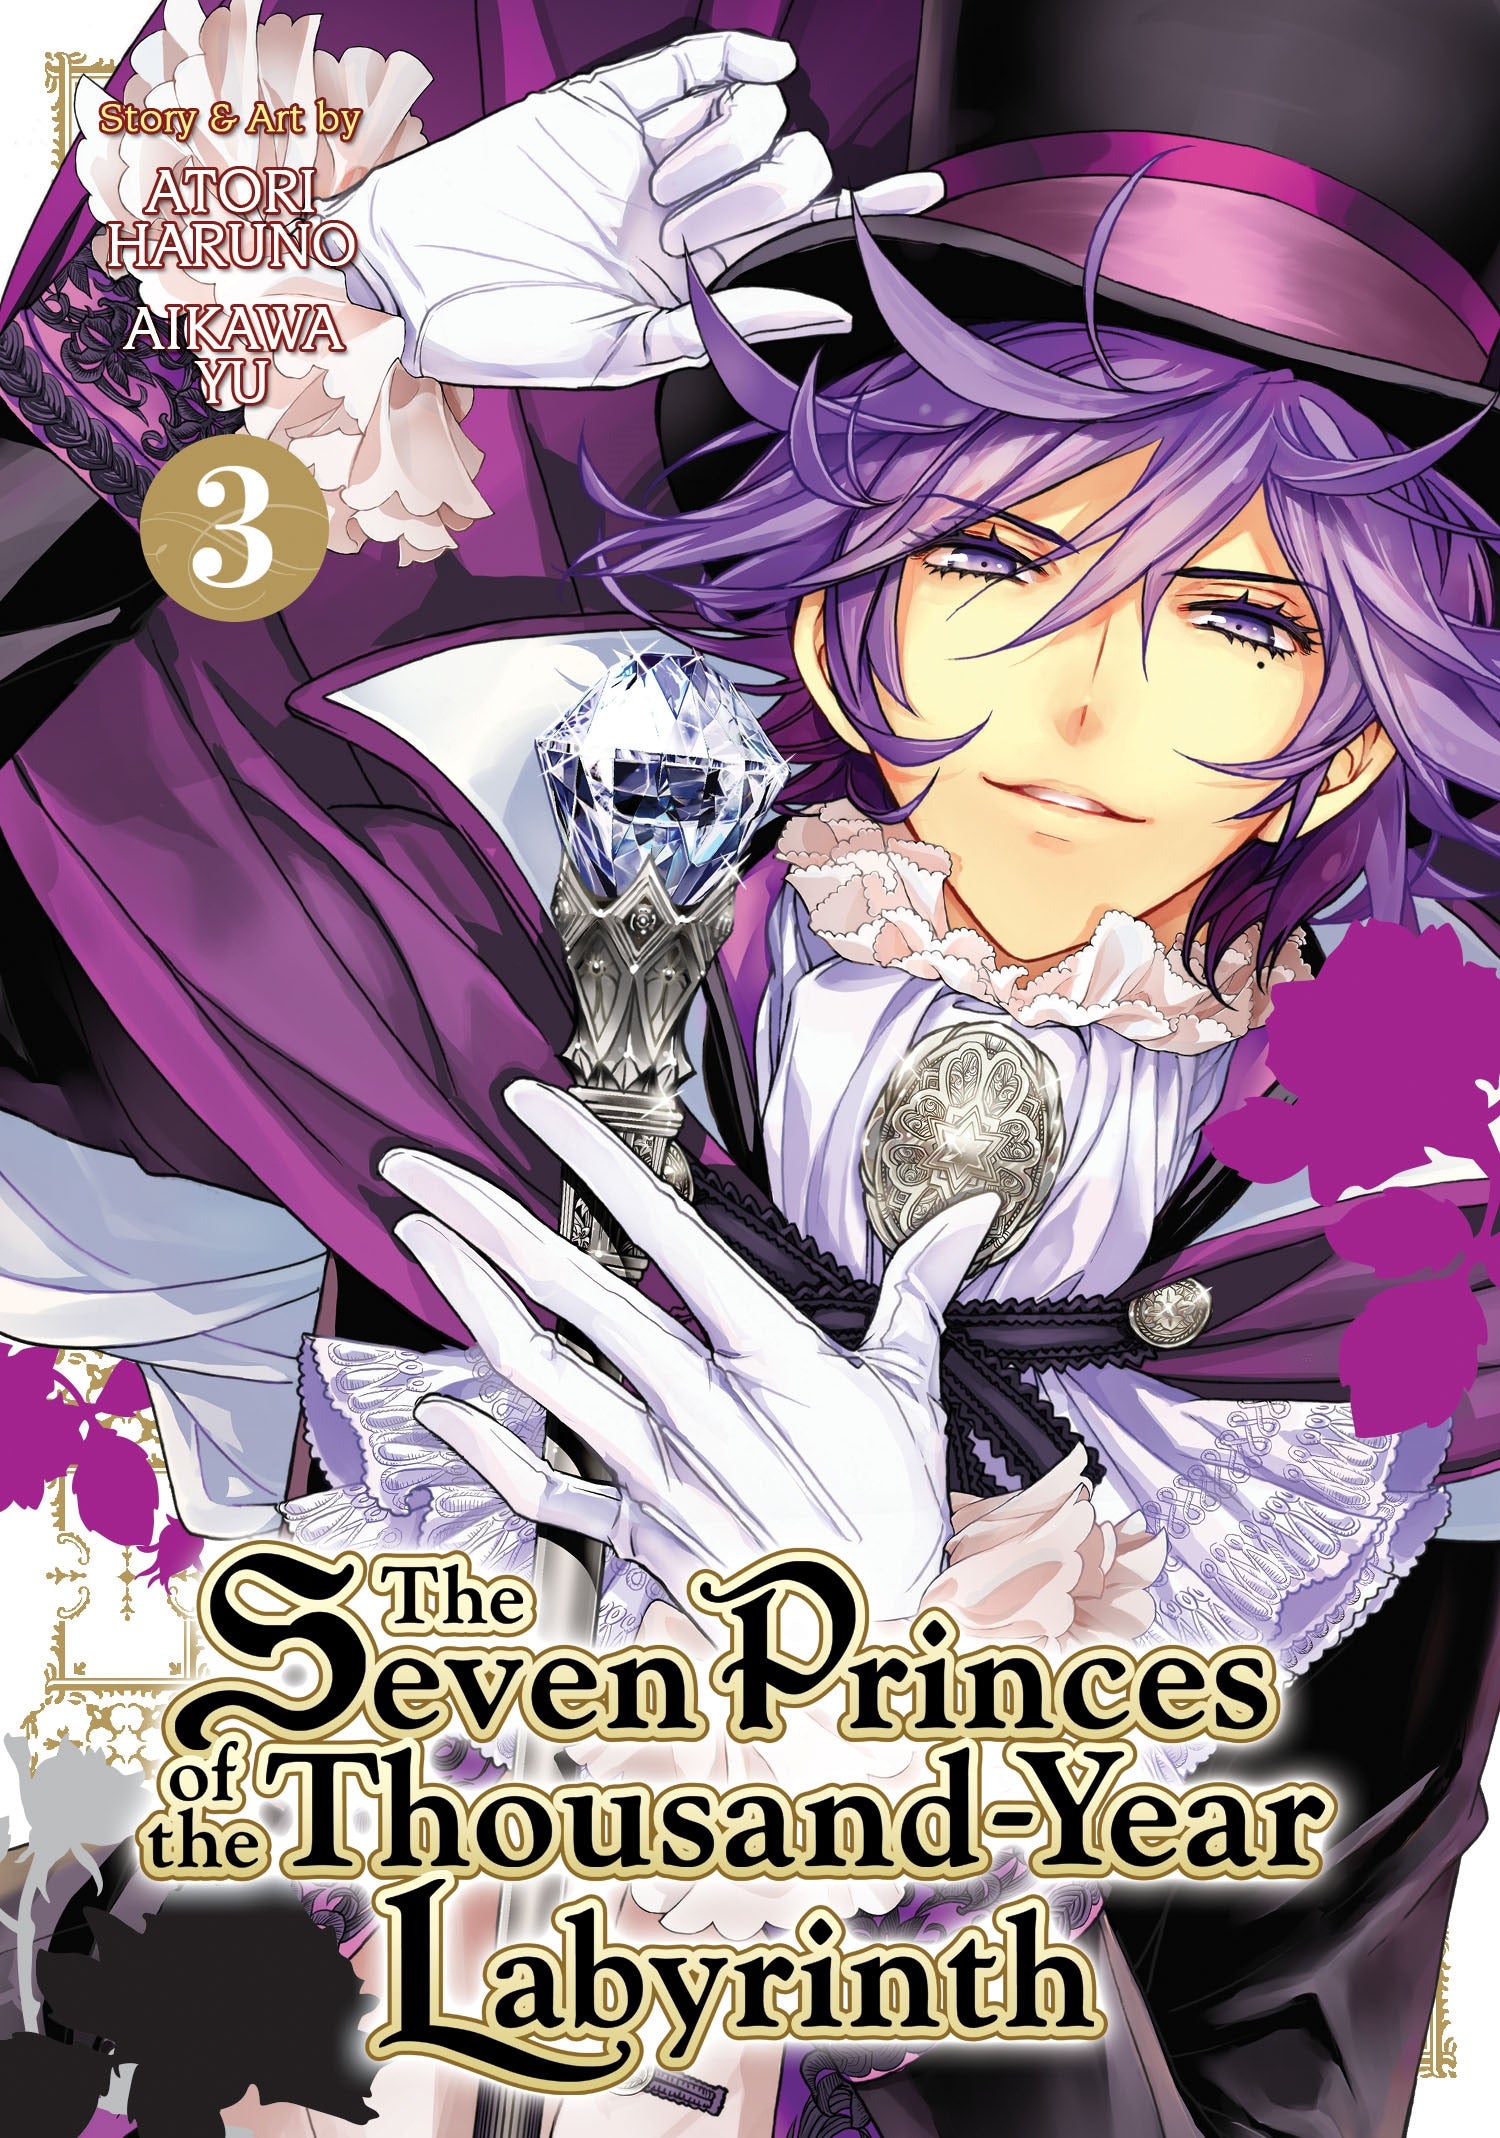 The Seven Princes of the Thousand-Year Labyrinth Vol. 3 - Manga Warehouse